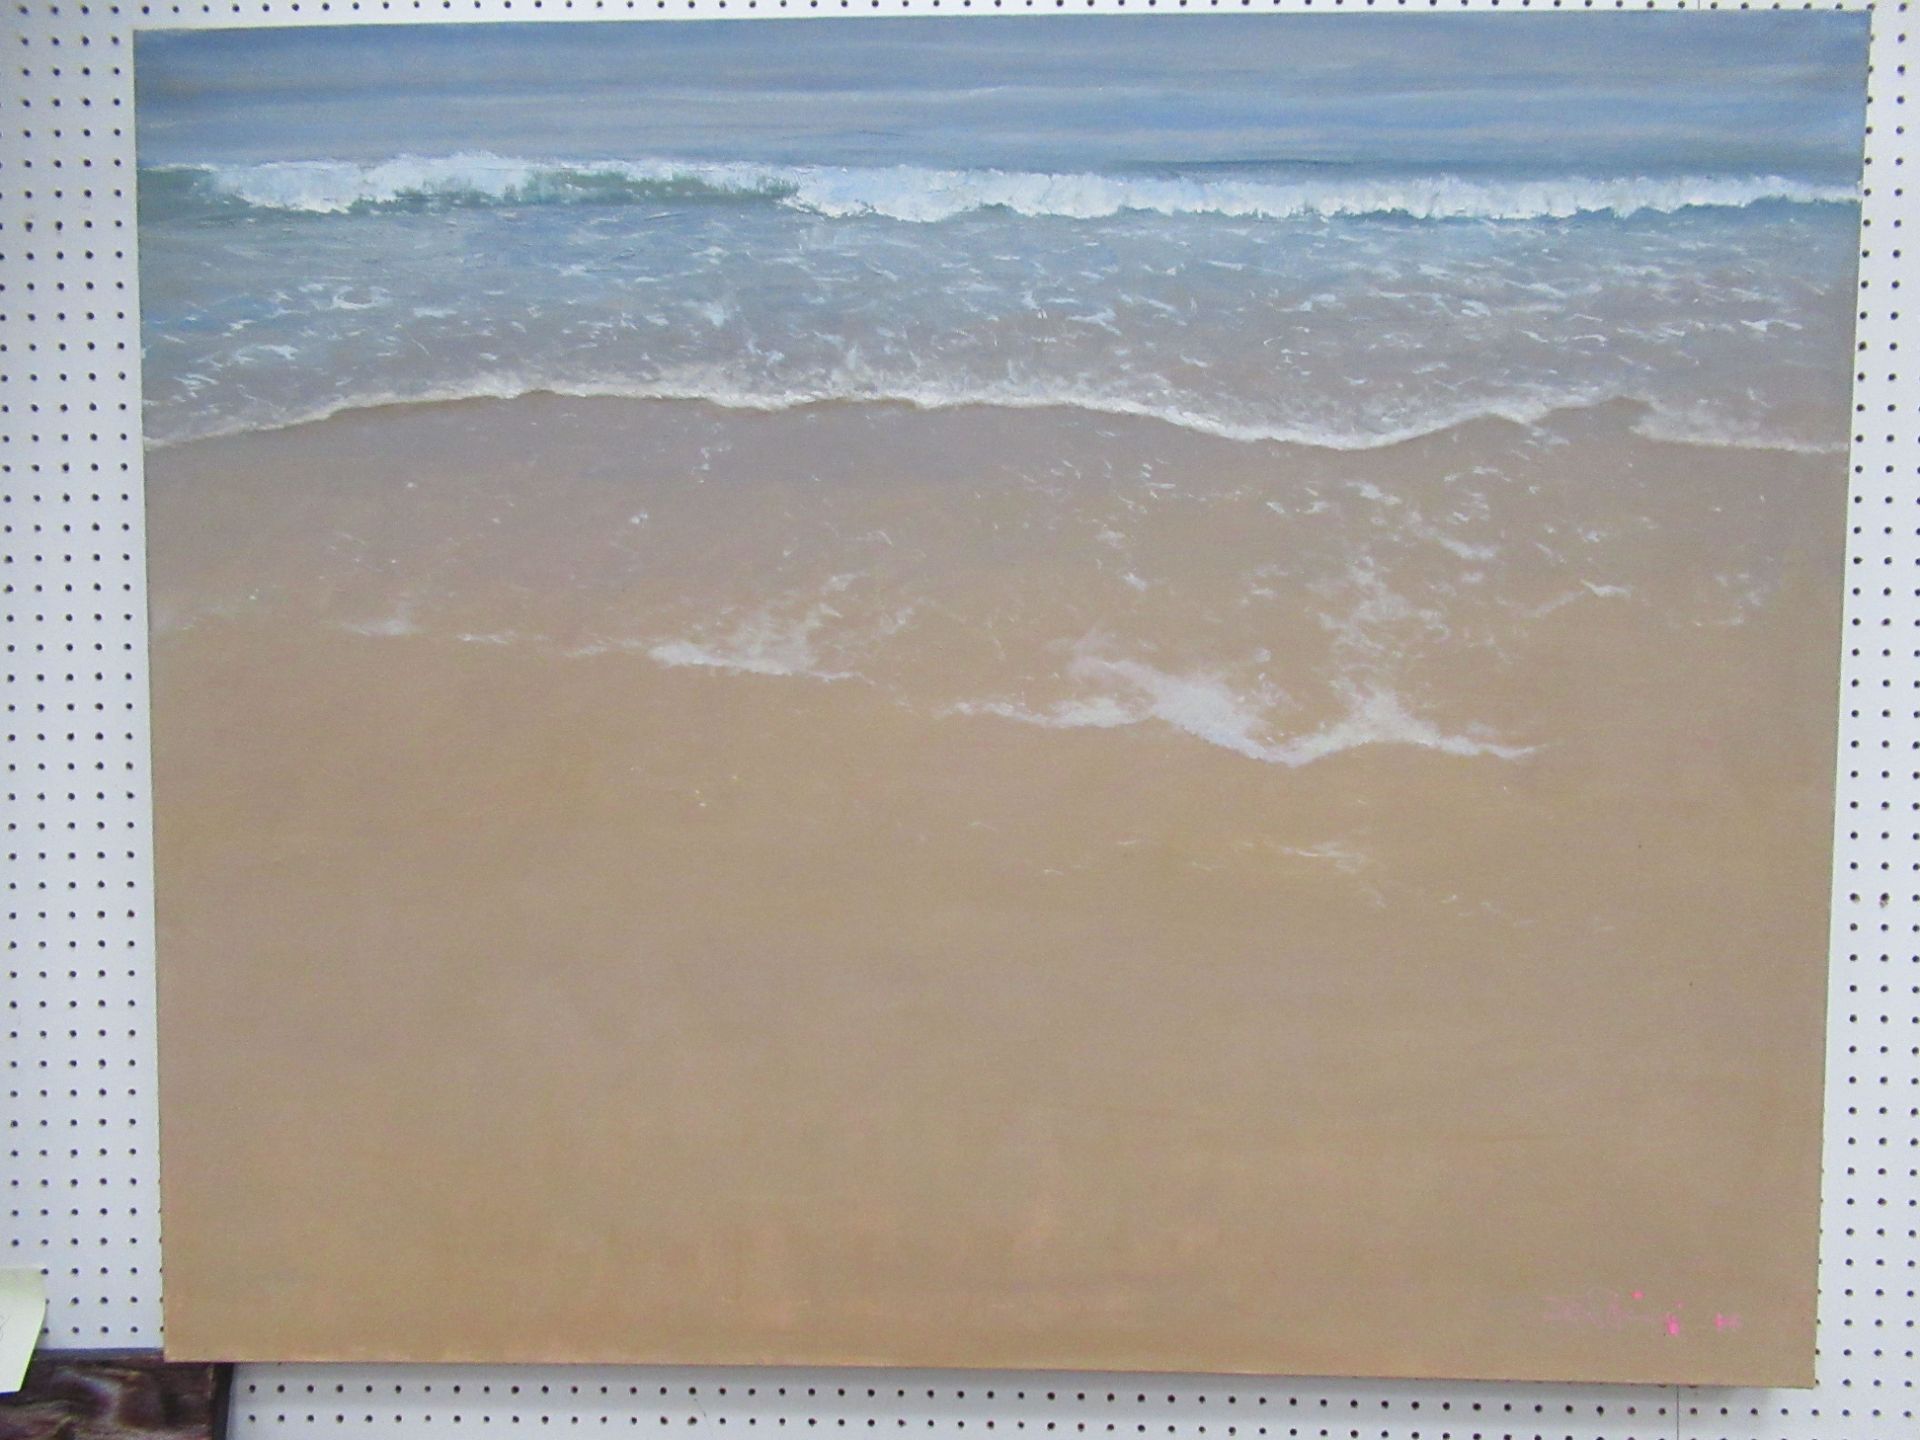 'Sandy Beach' Oil Painting by Mike Service. RRP £995. (39" x 32" unframed) - Image 2 of 3